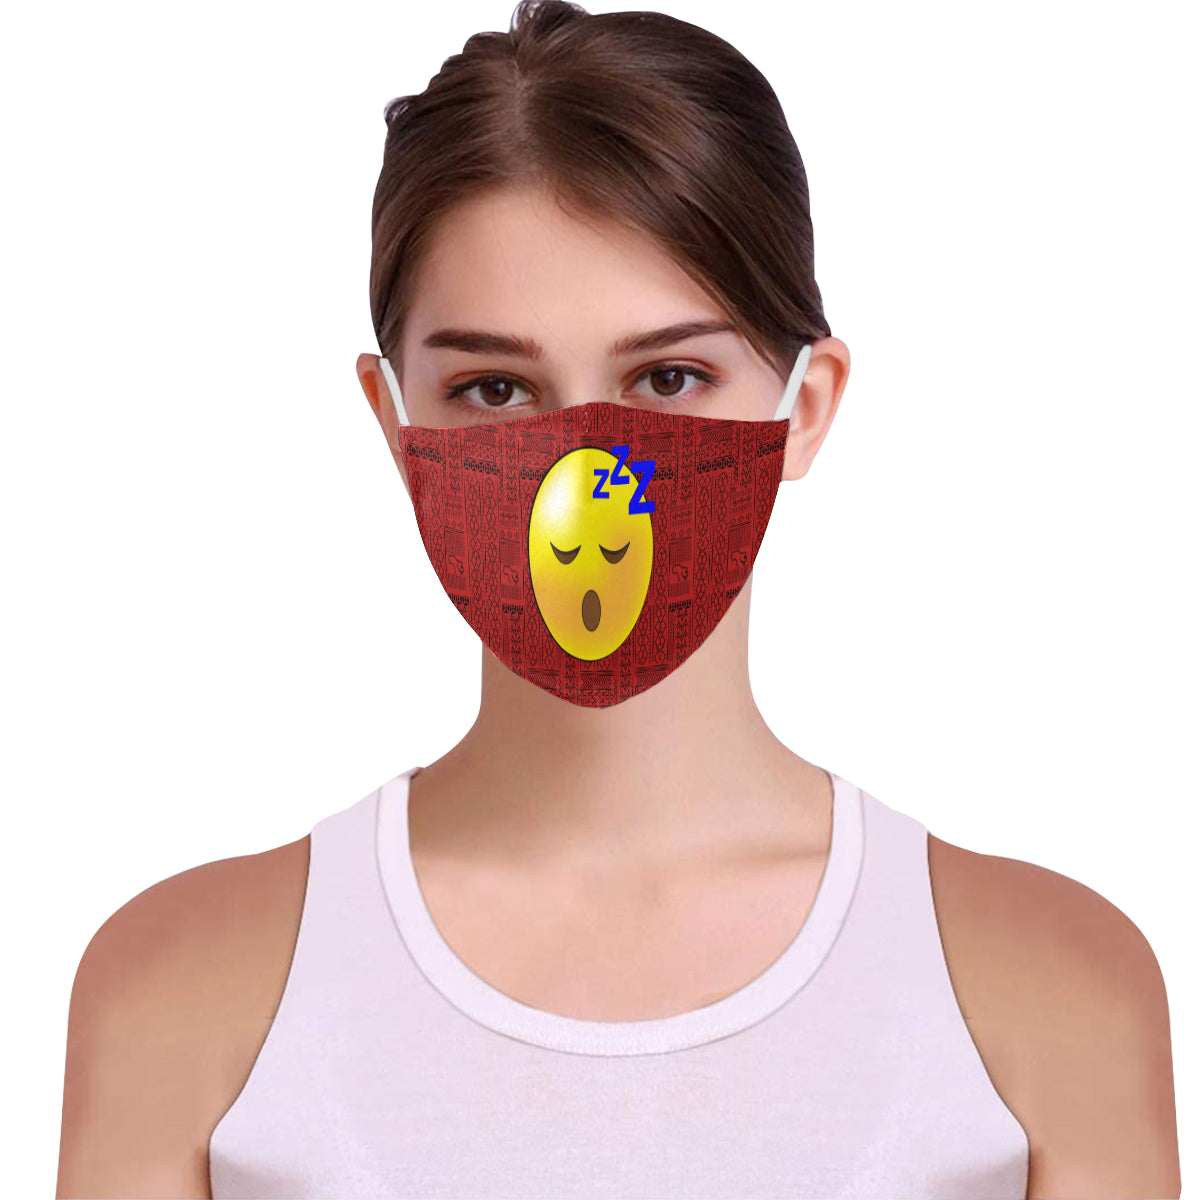 I'm Tired! Tribal Print Emoji Cotton Fabric Face Mask with Filter Slot and Adjustable Strap - Non-medical use (2 Filters Included)